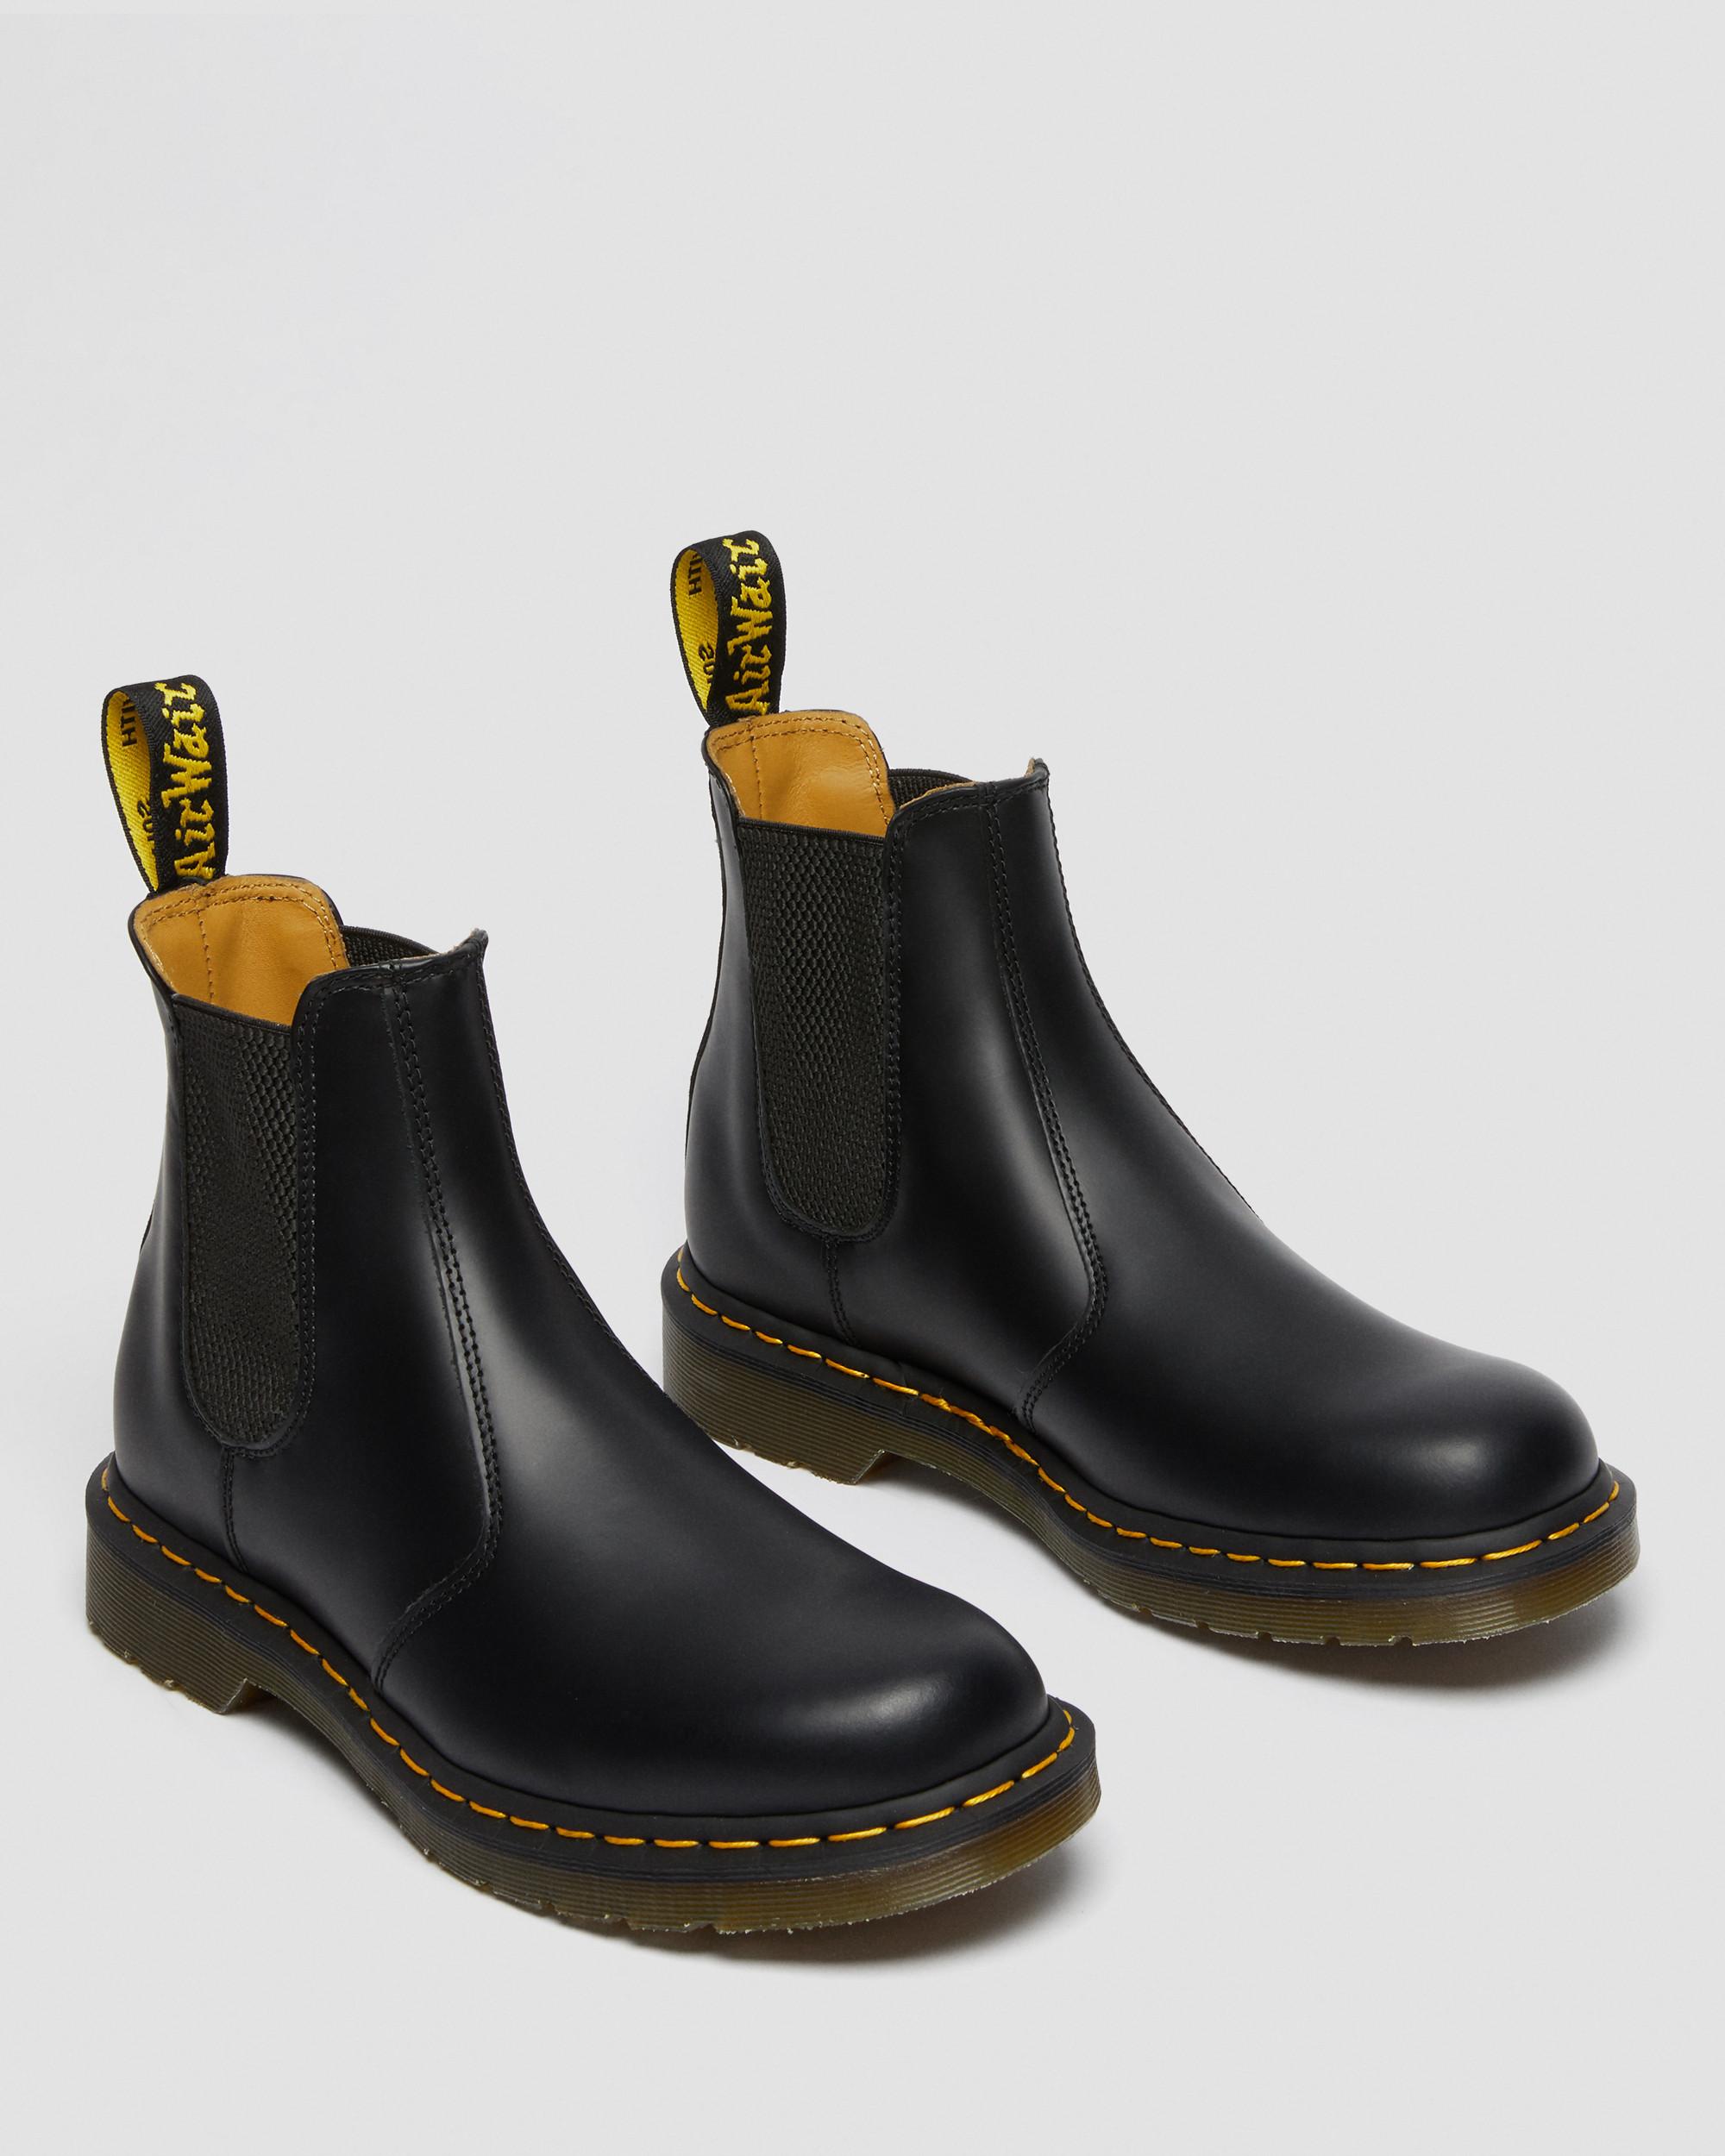 2976 Stitch Smooth Leather Chelsea Boots2976 Yellow Stitch Smooth Leather Chelsea Boots Dr. Martens